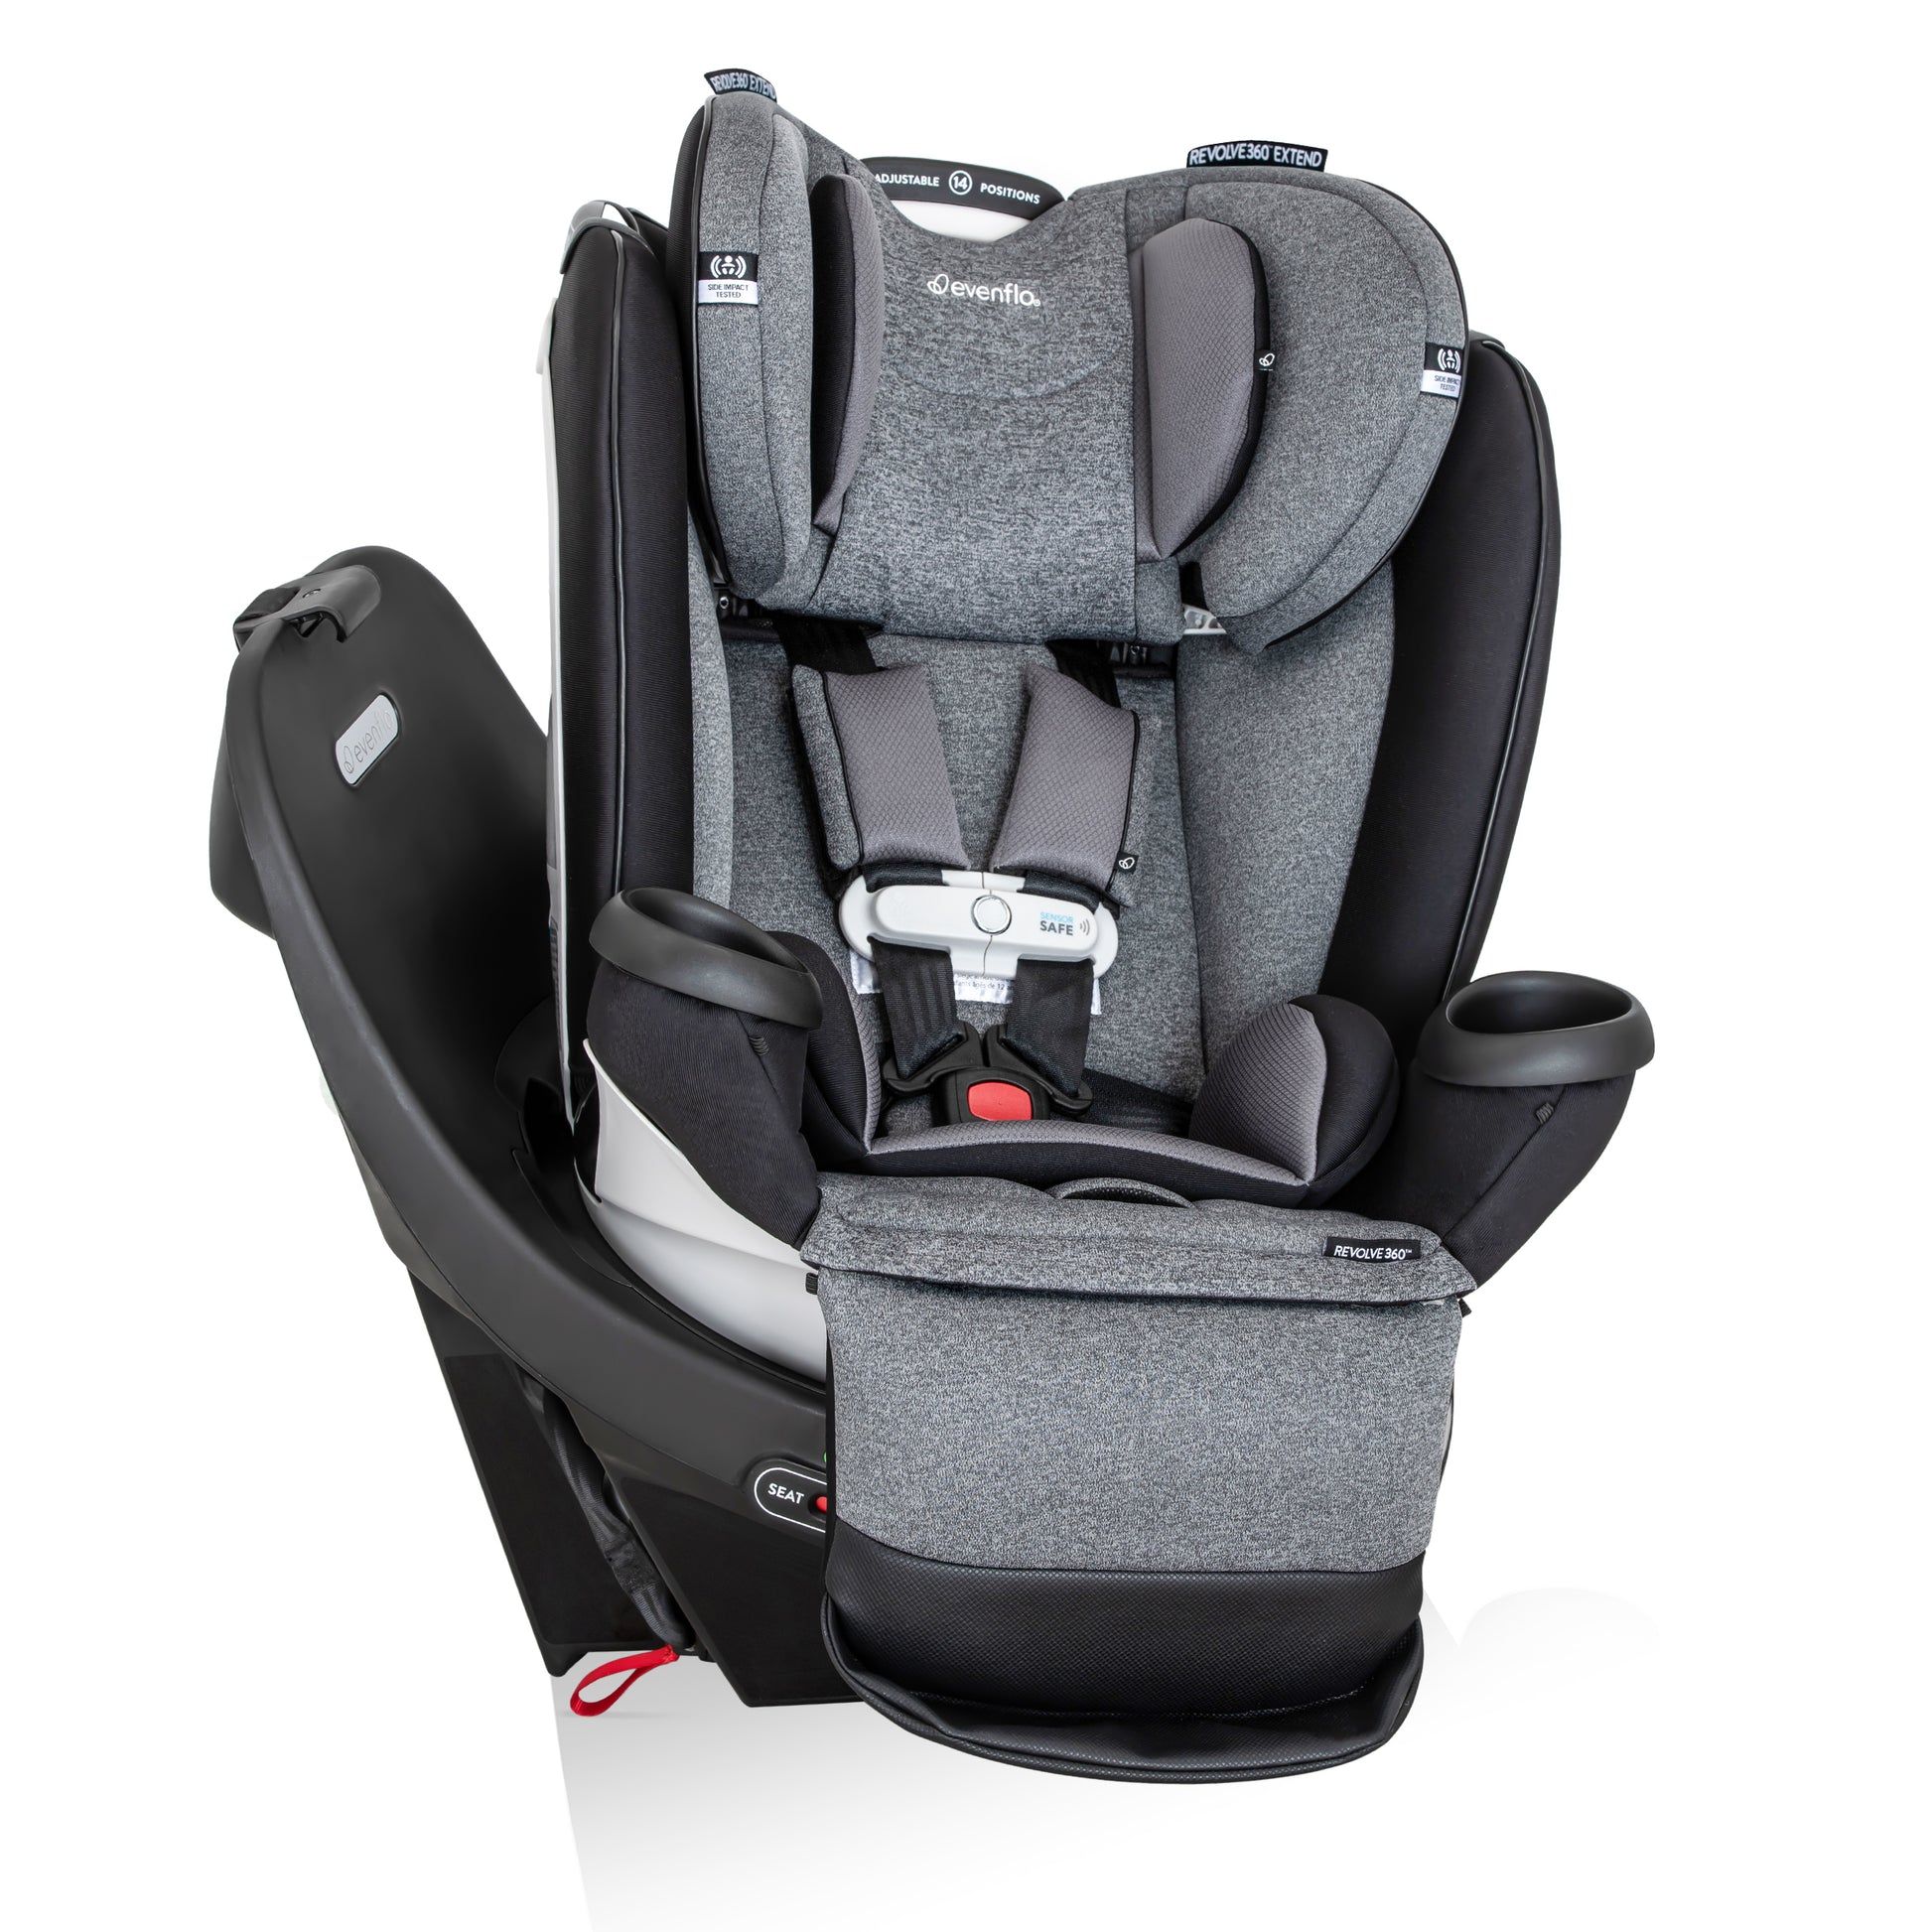 Are Swivel Car Seats Safe? » Safe in the Seat